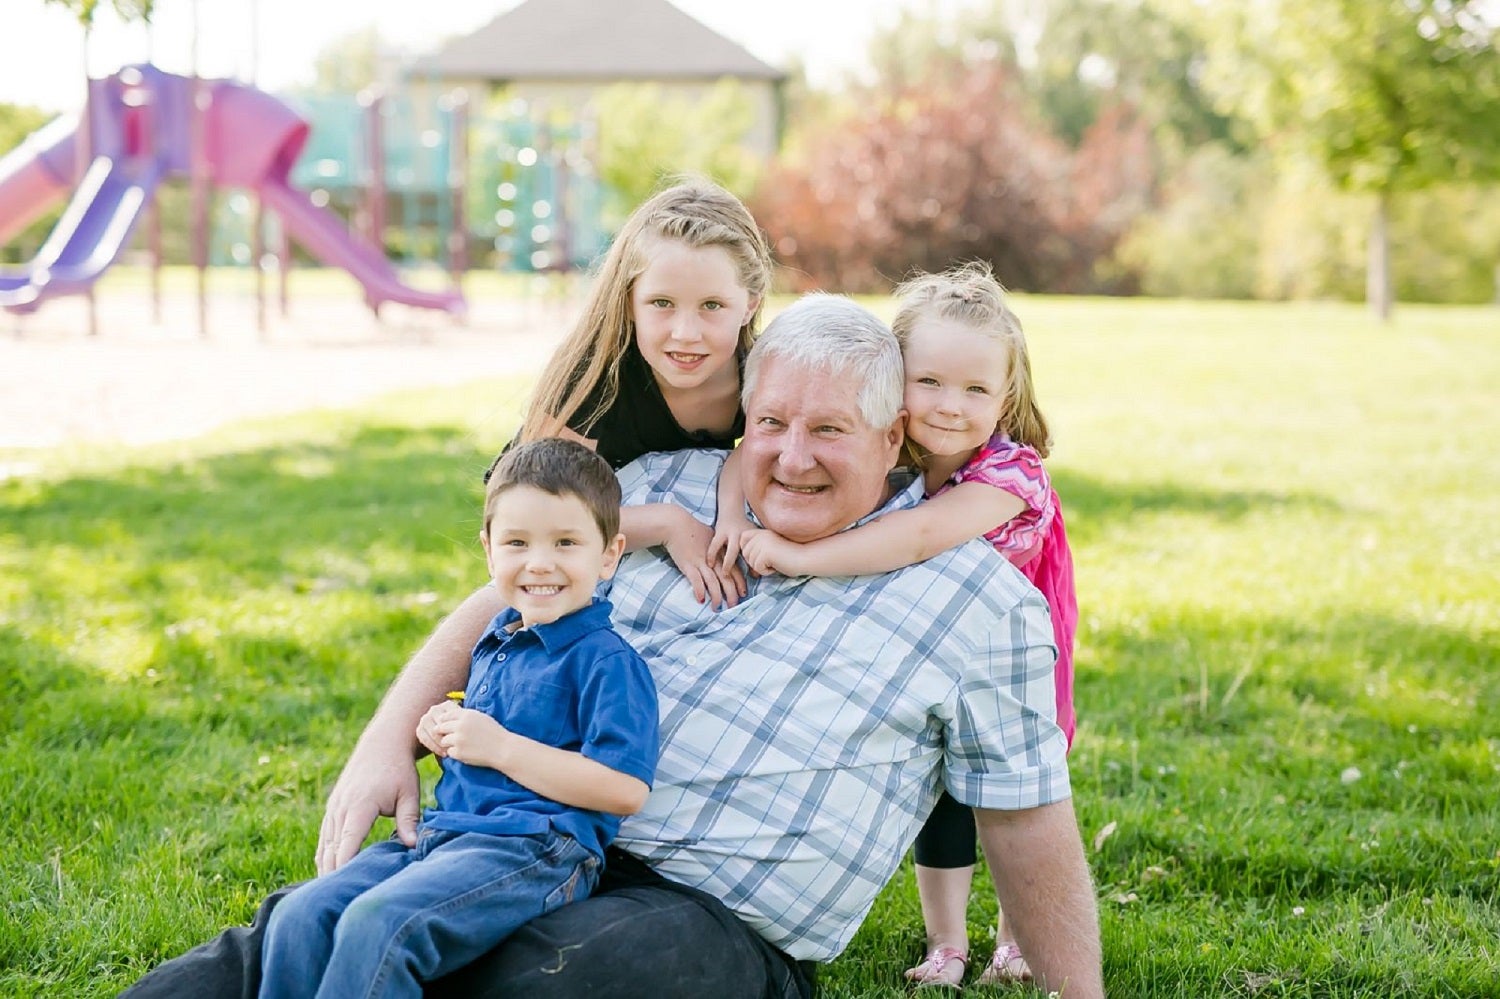 Phage therapy patient Greg Breed with three grandchildren at a playground